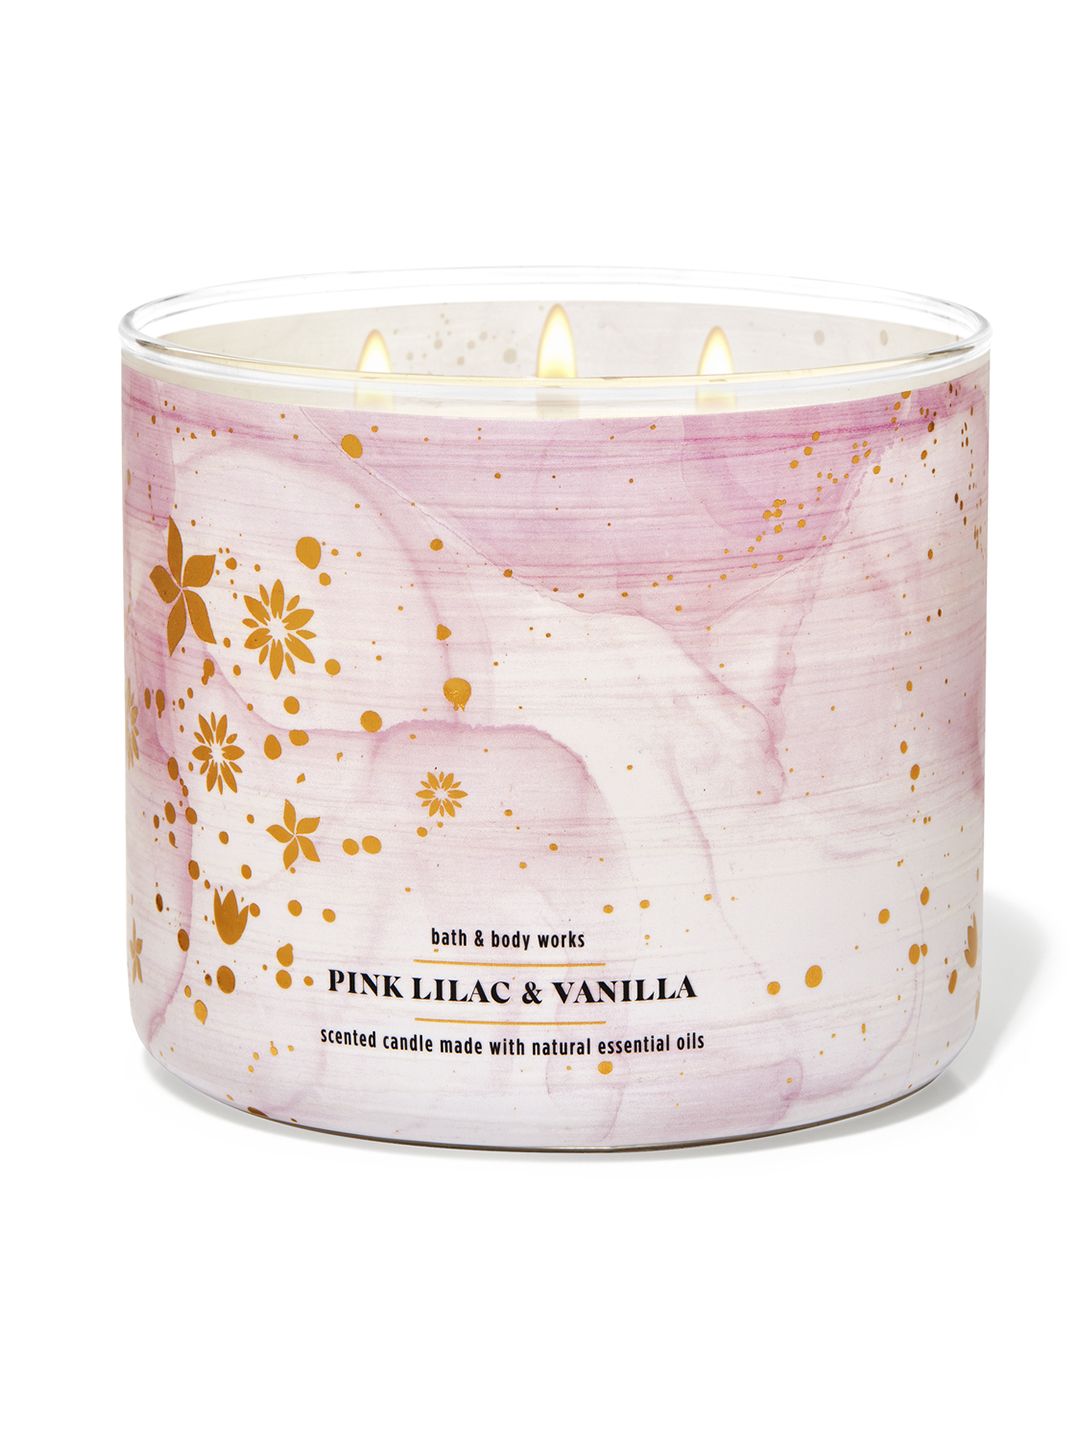 Bath & Body Works Pink Lilac & Vanilla 3-Wick Candle - 411 g Price in India